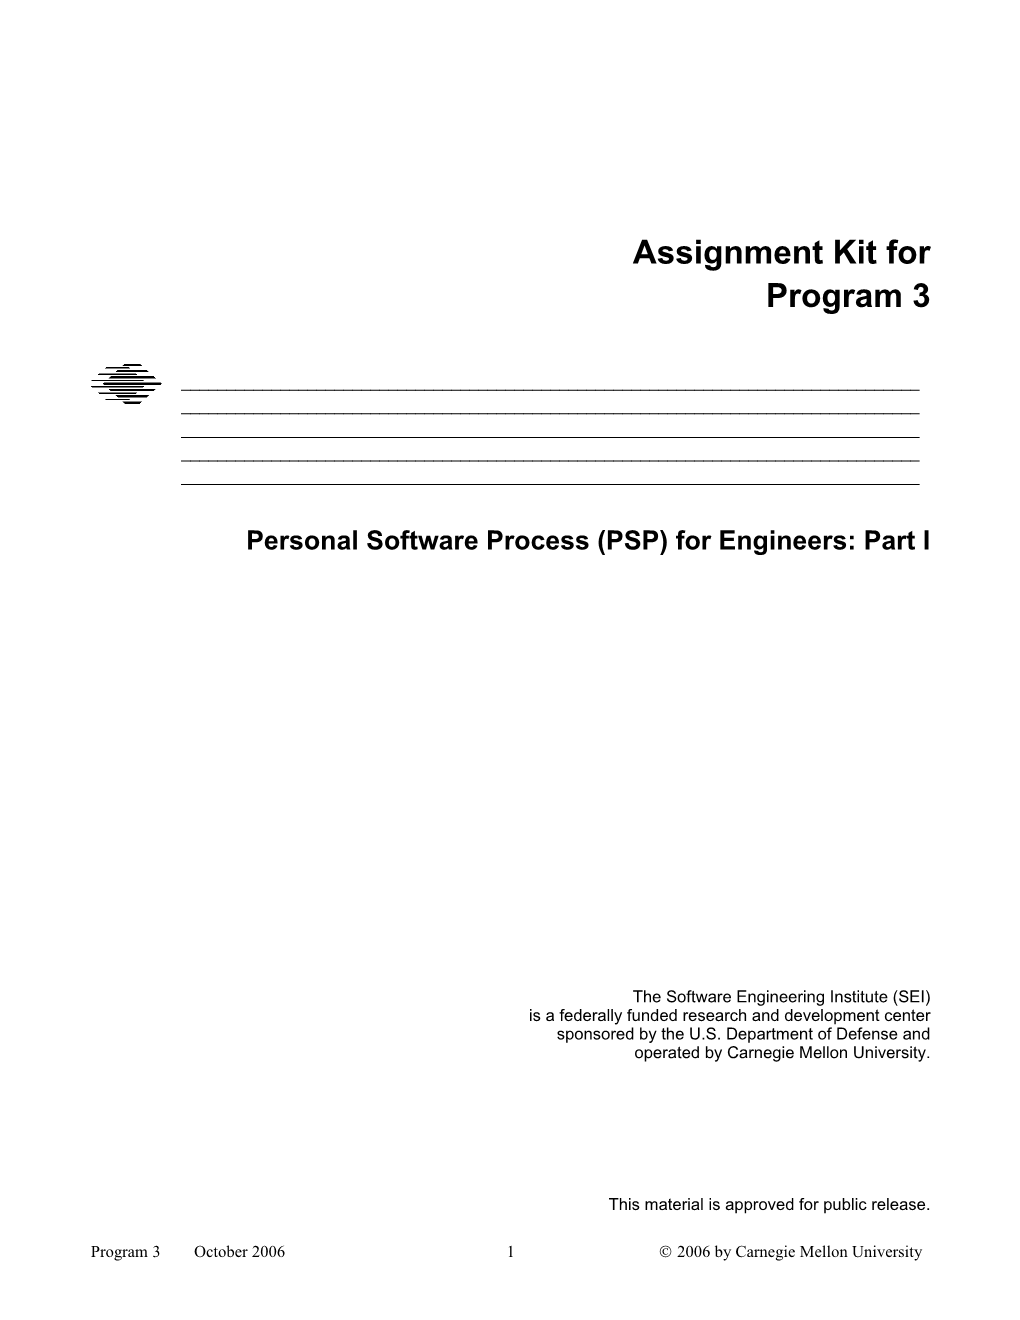 Personal Software Process (PSP) for Engineers: Part I